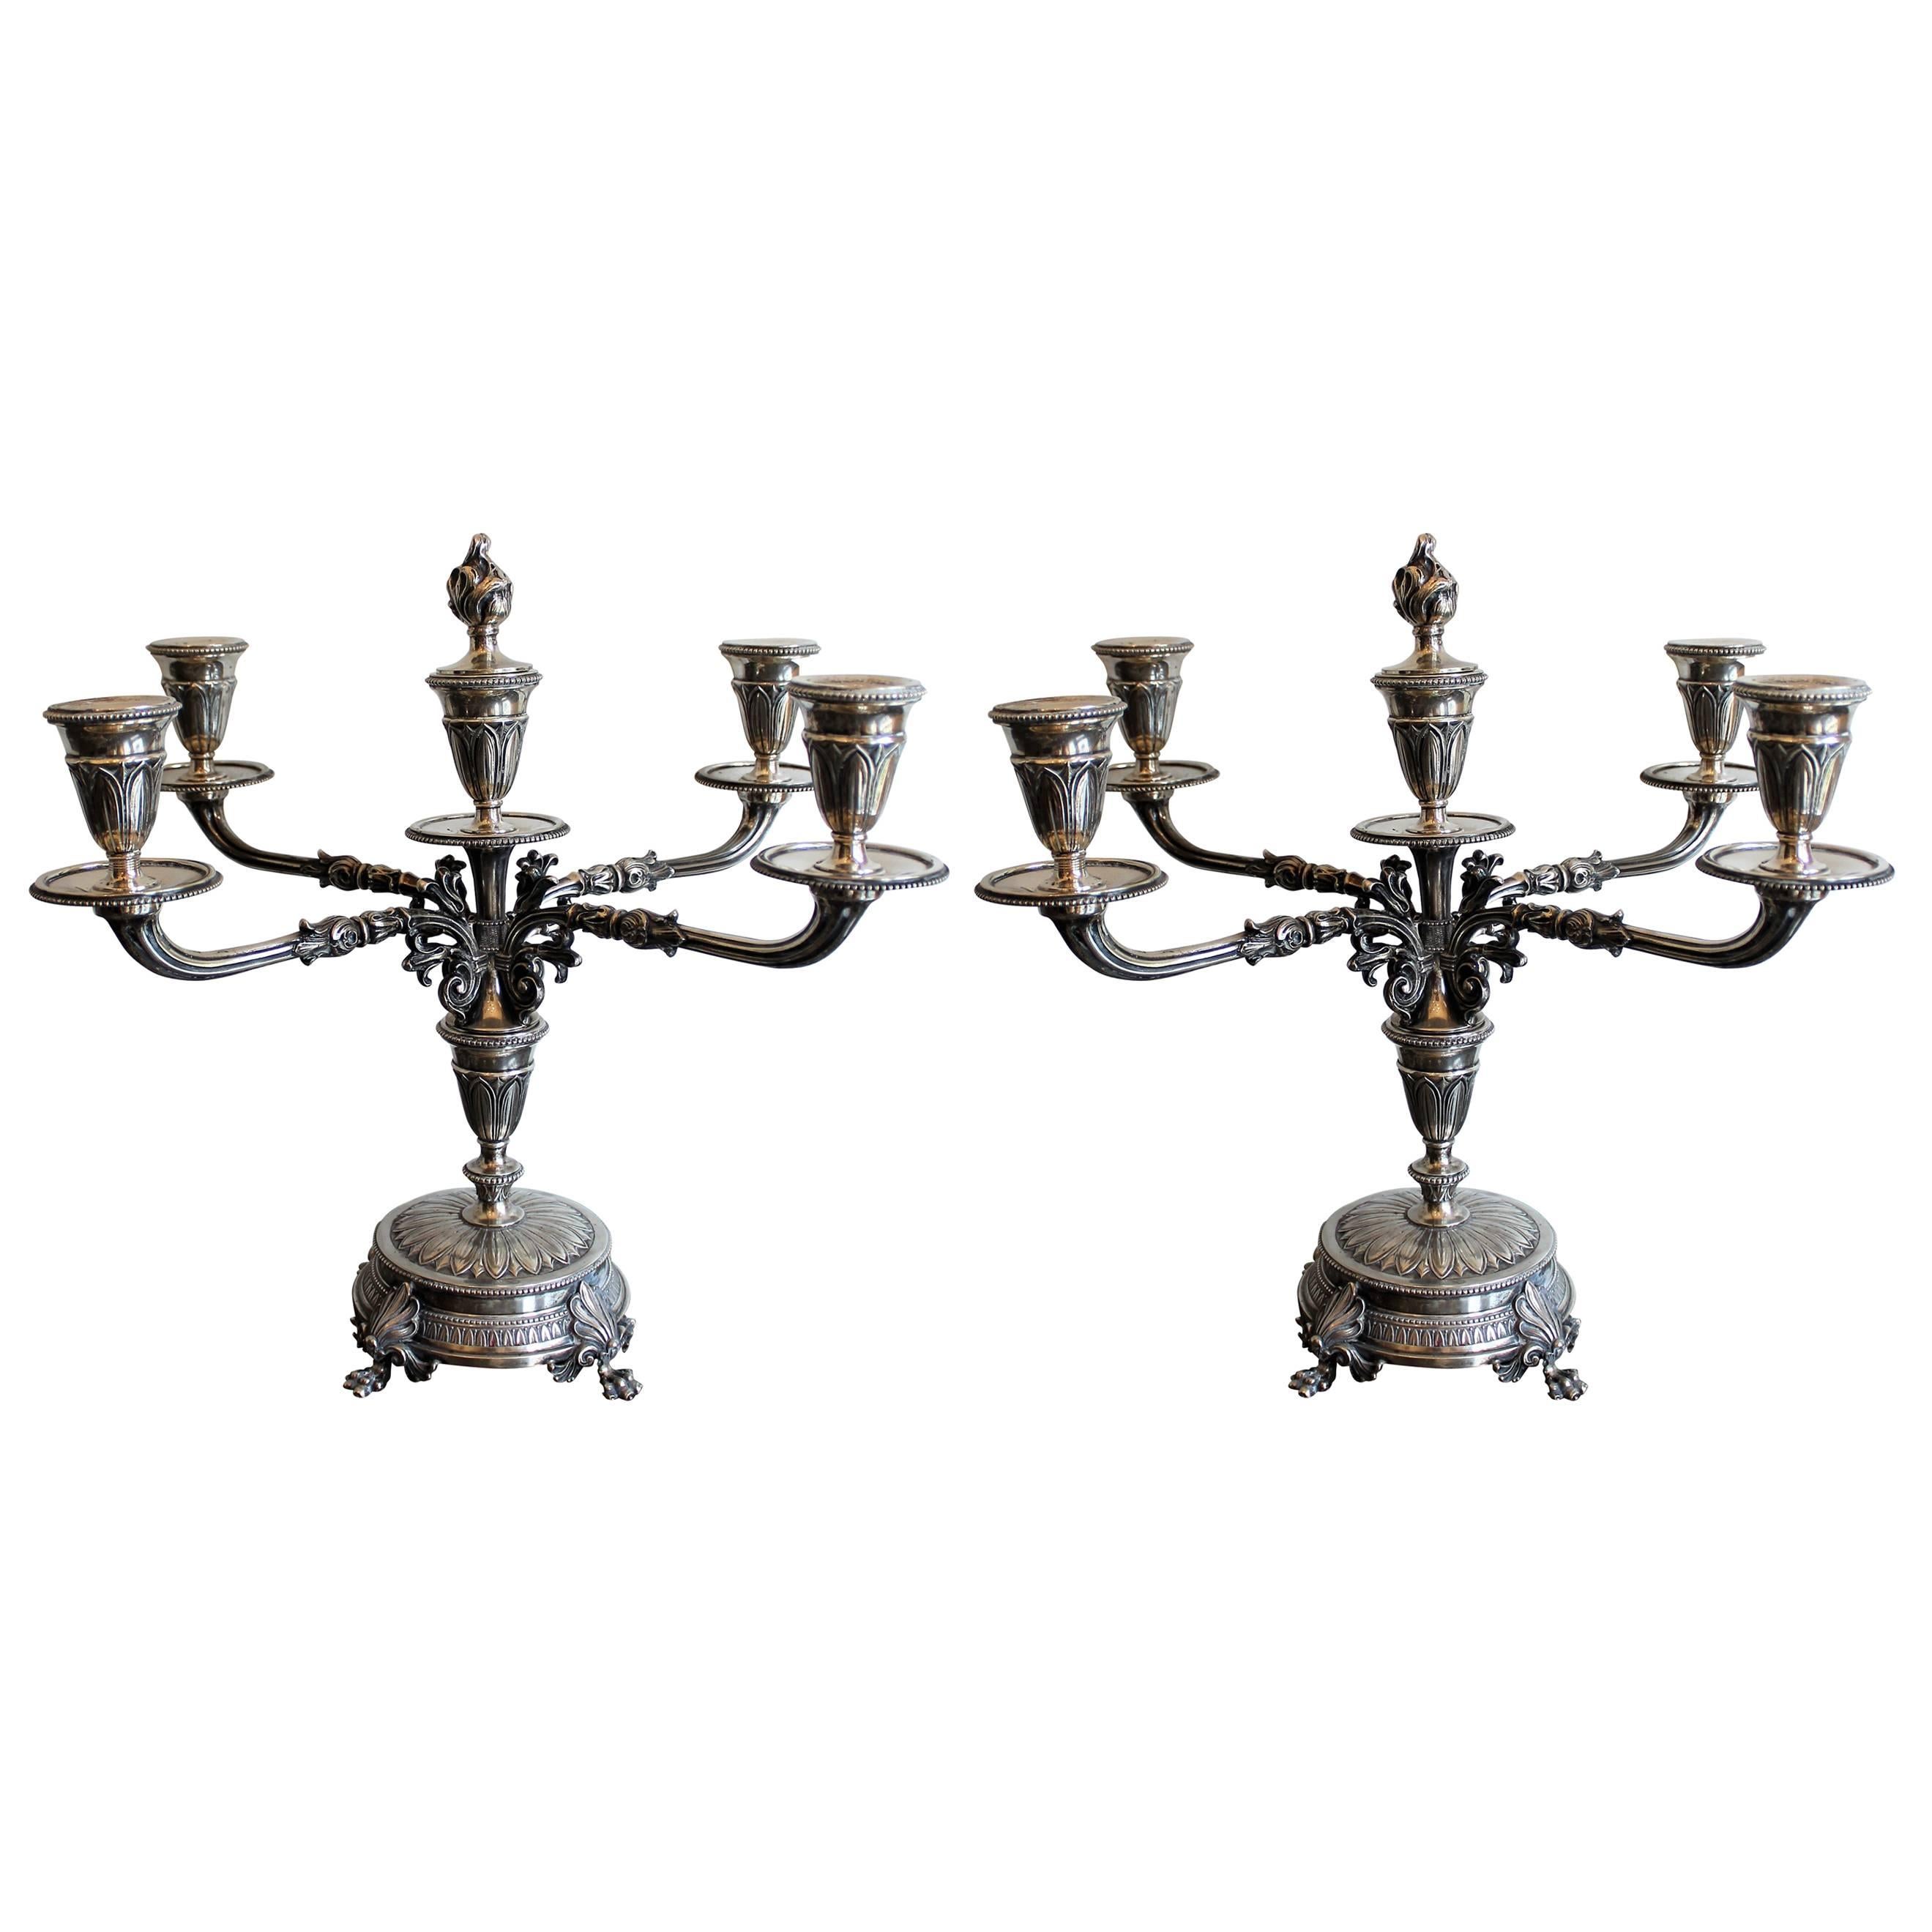 Pair of 19th Century Continental Silver Candelabra